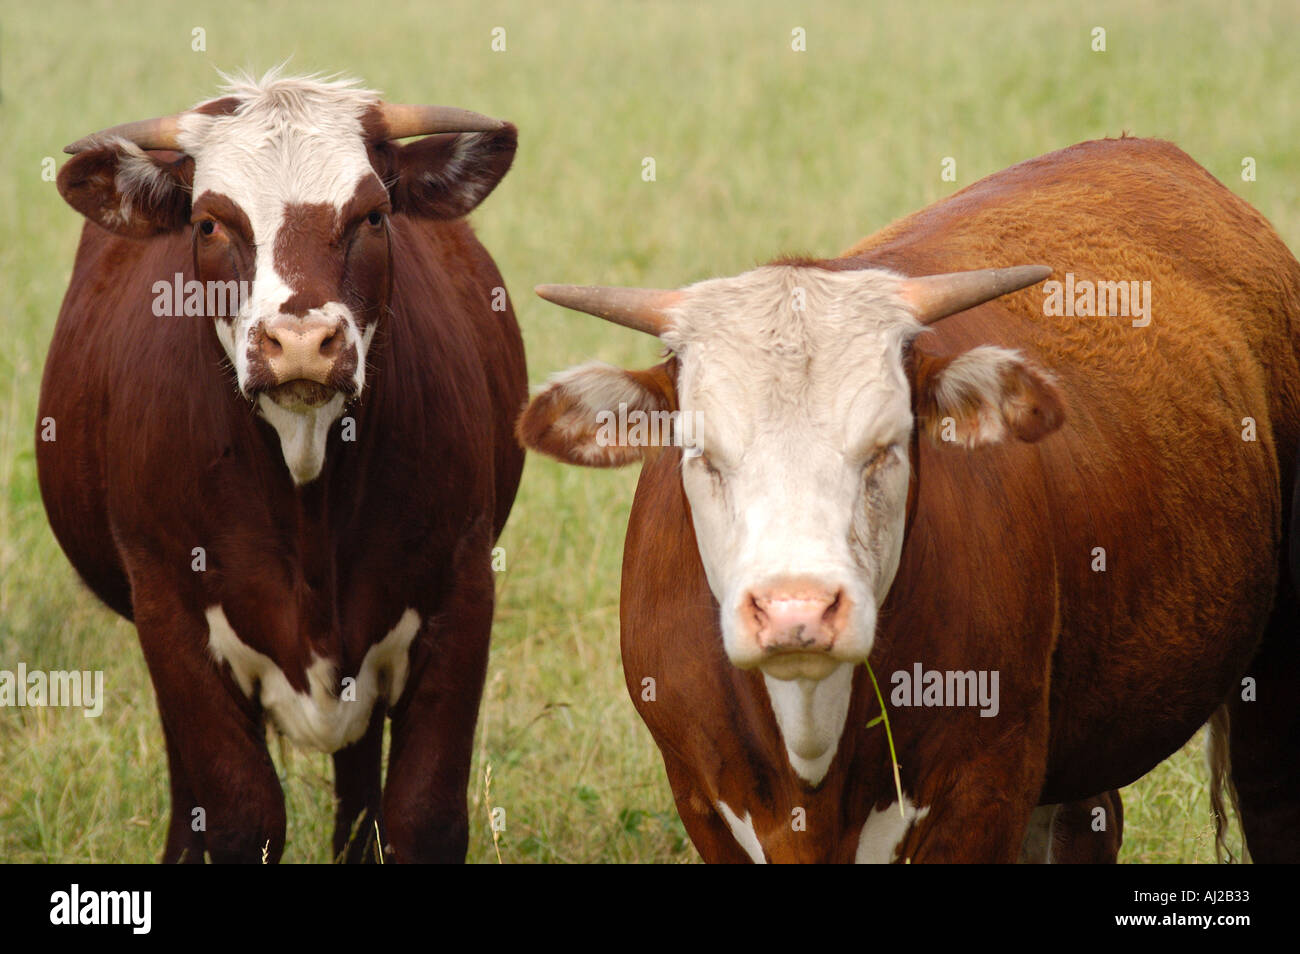 Polled Hereford cows in Argentina Stock Photo